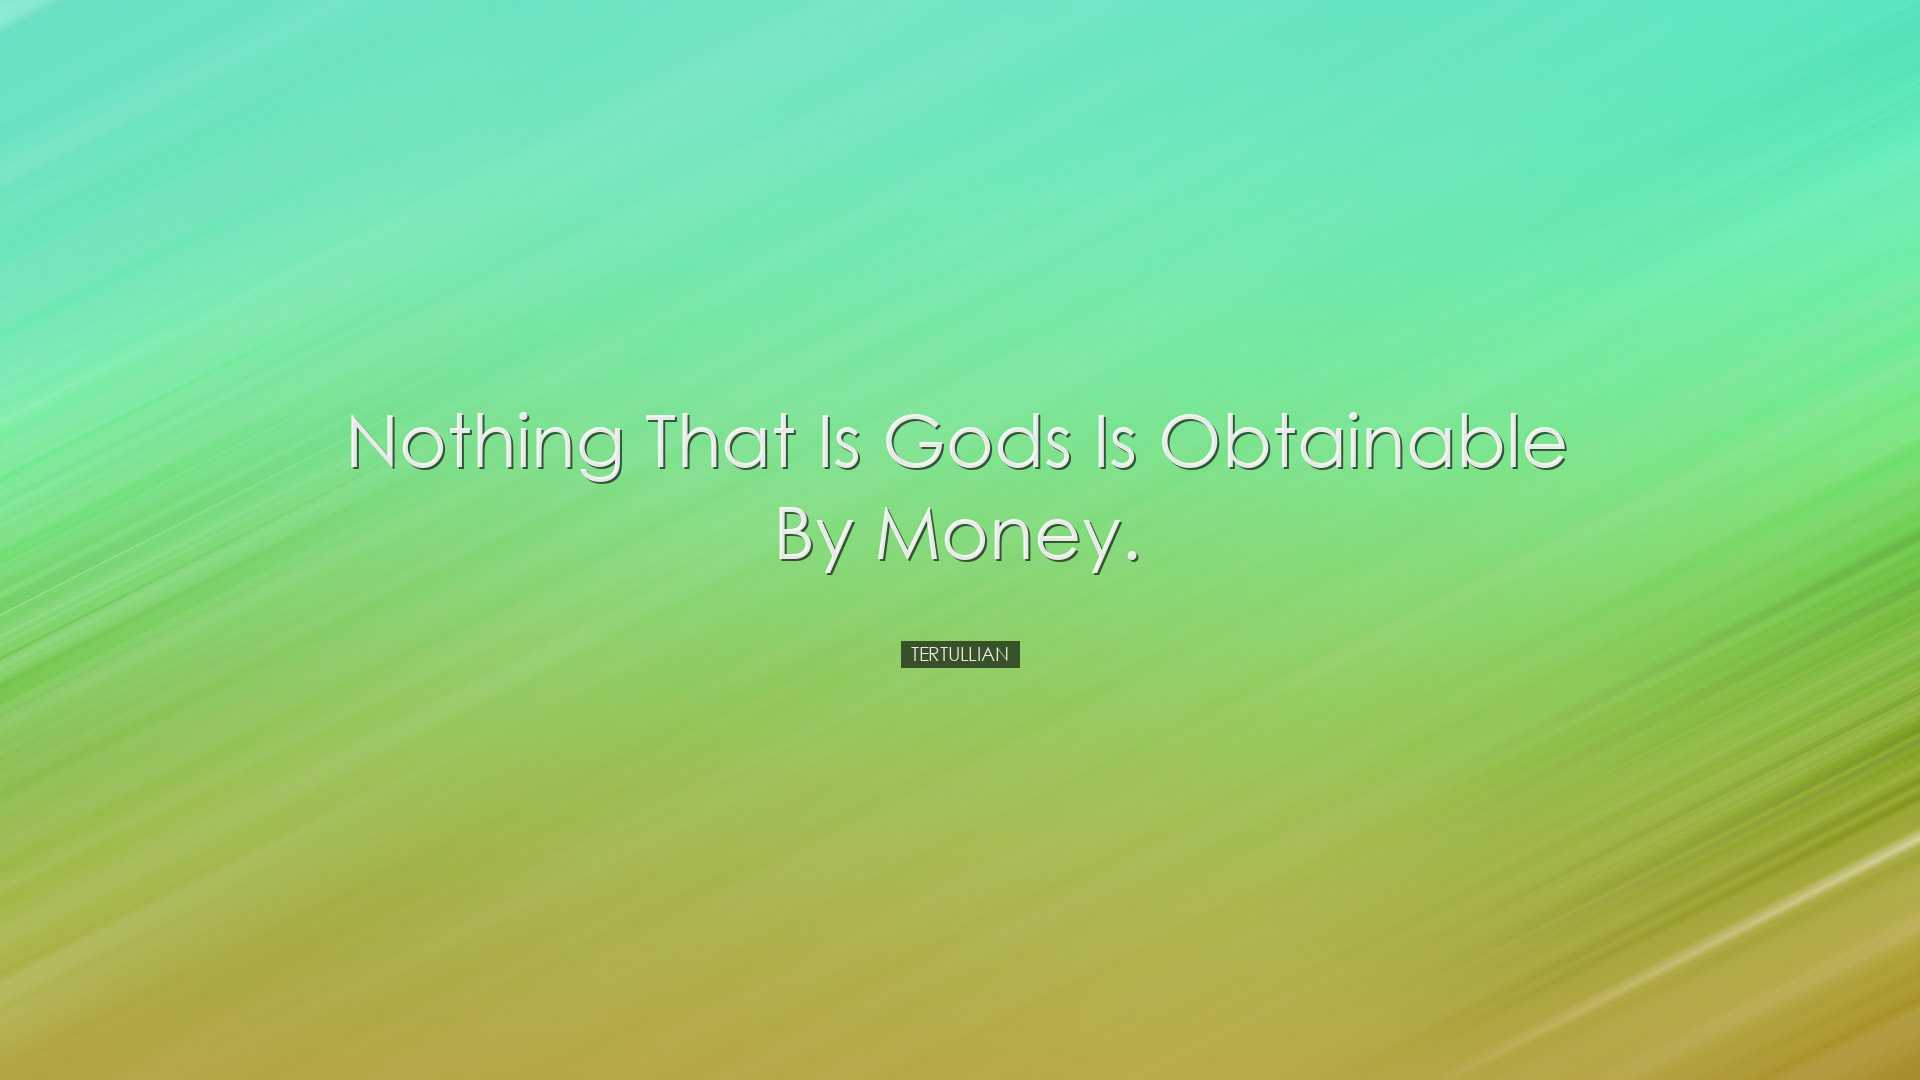 Nothing that is Gods is obtainable by money. - Tertullian